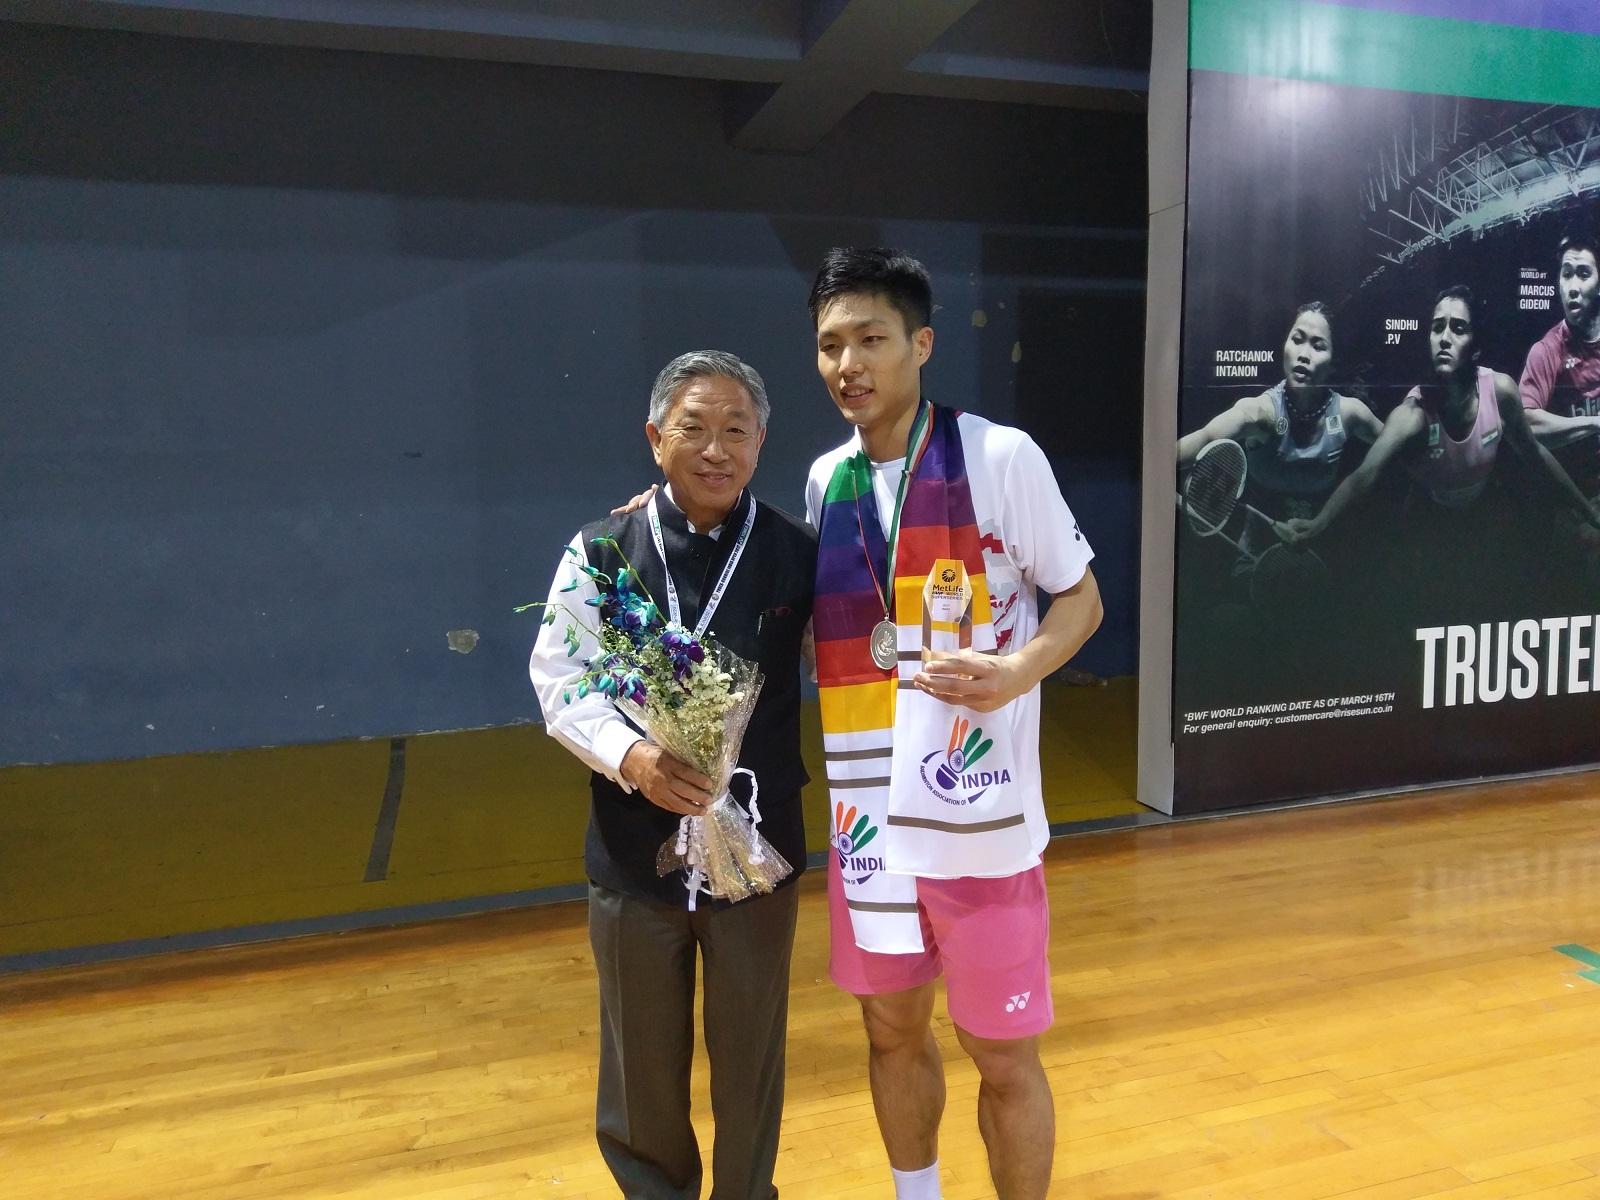 Amb. Tien Chung-Kwang (left), Representative of Taipei Economic and Cultural Center in India, congratulated Chou Tien-Chen after the badminton player won second place in Men’s Single, India Open Super Series 2017 April 2.